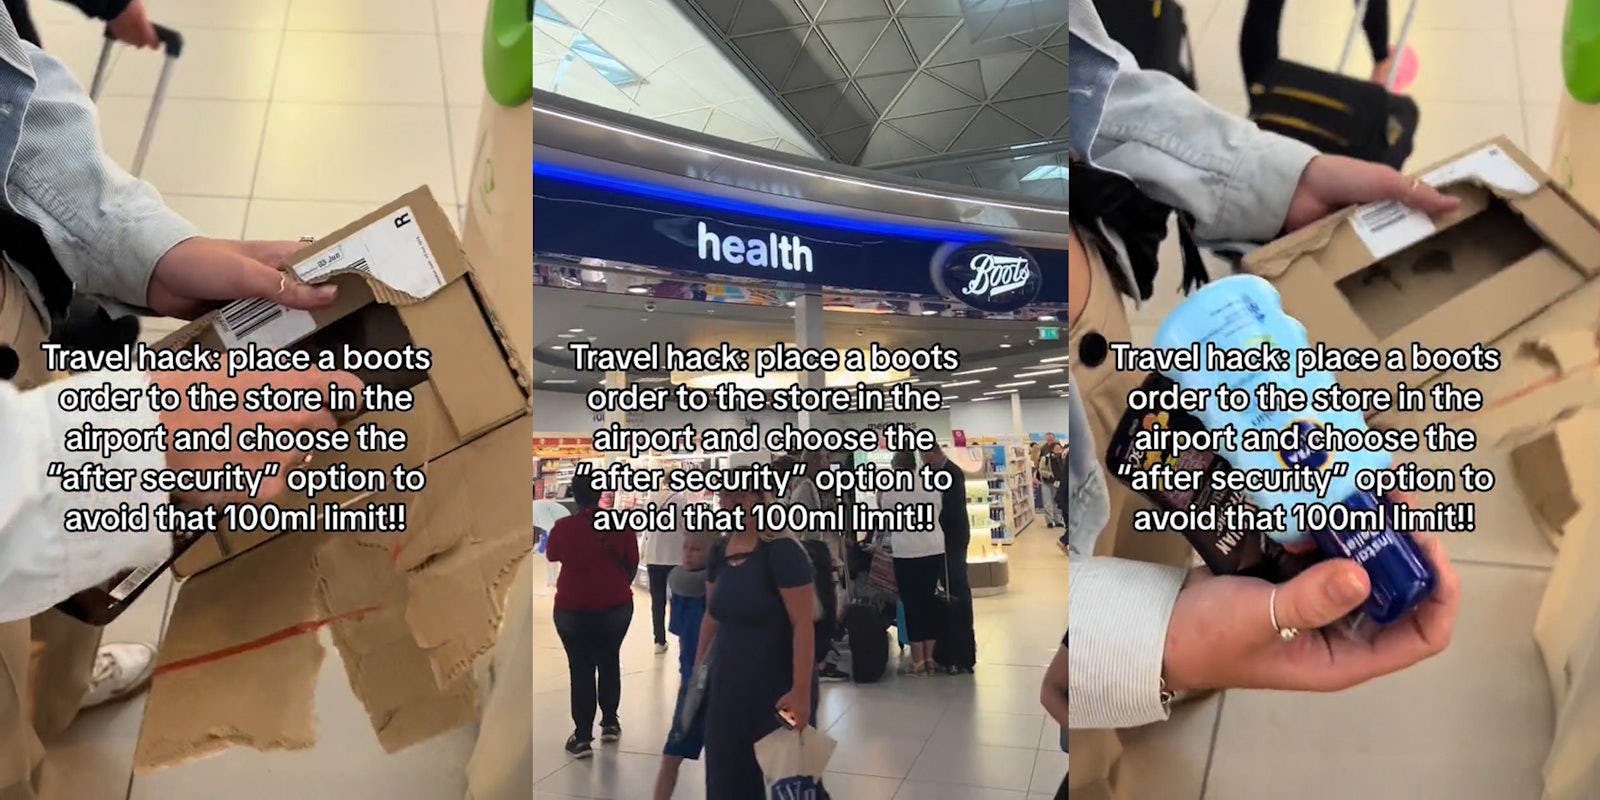 person holding box in airport with caption 'Travel hack: place a boots order to the store in the airport and choose the 'after security' option to avoid 100 ml limit!' (l) Boots store in airport with caption 'Travel hack: place a boots order to the store in the airport and choose the 'after security' option to avoid 100 ml limit!' (c) person holding box while removing ordered items from inside in airport with caption 'Travel hack: place a boots order to the store in the airport and choose the 'after security' option to avoid 100 ml limit!' (r)